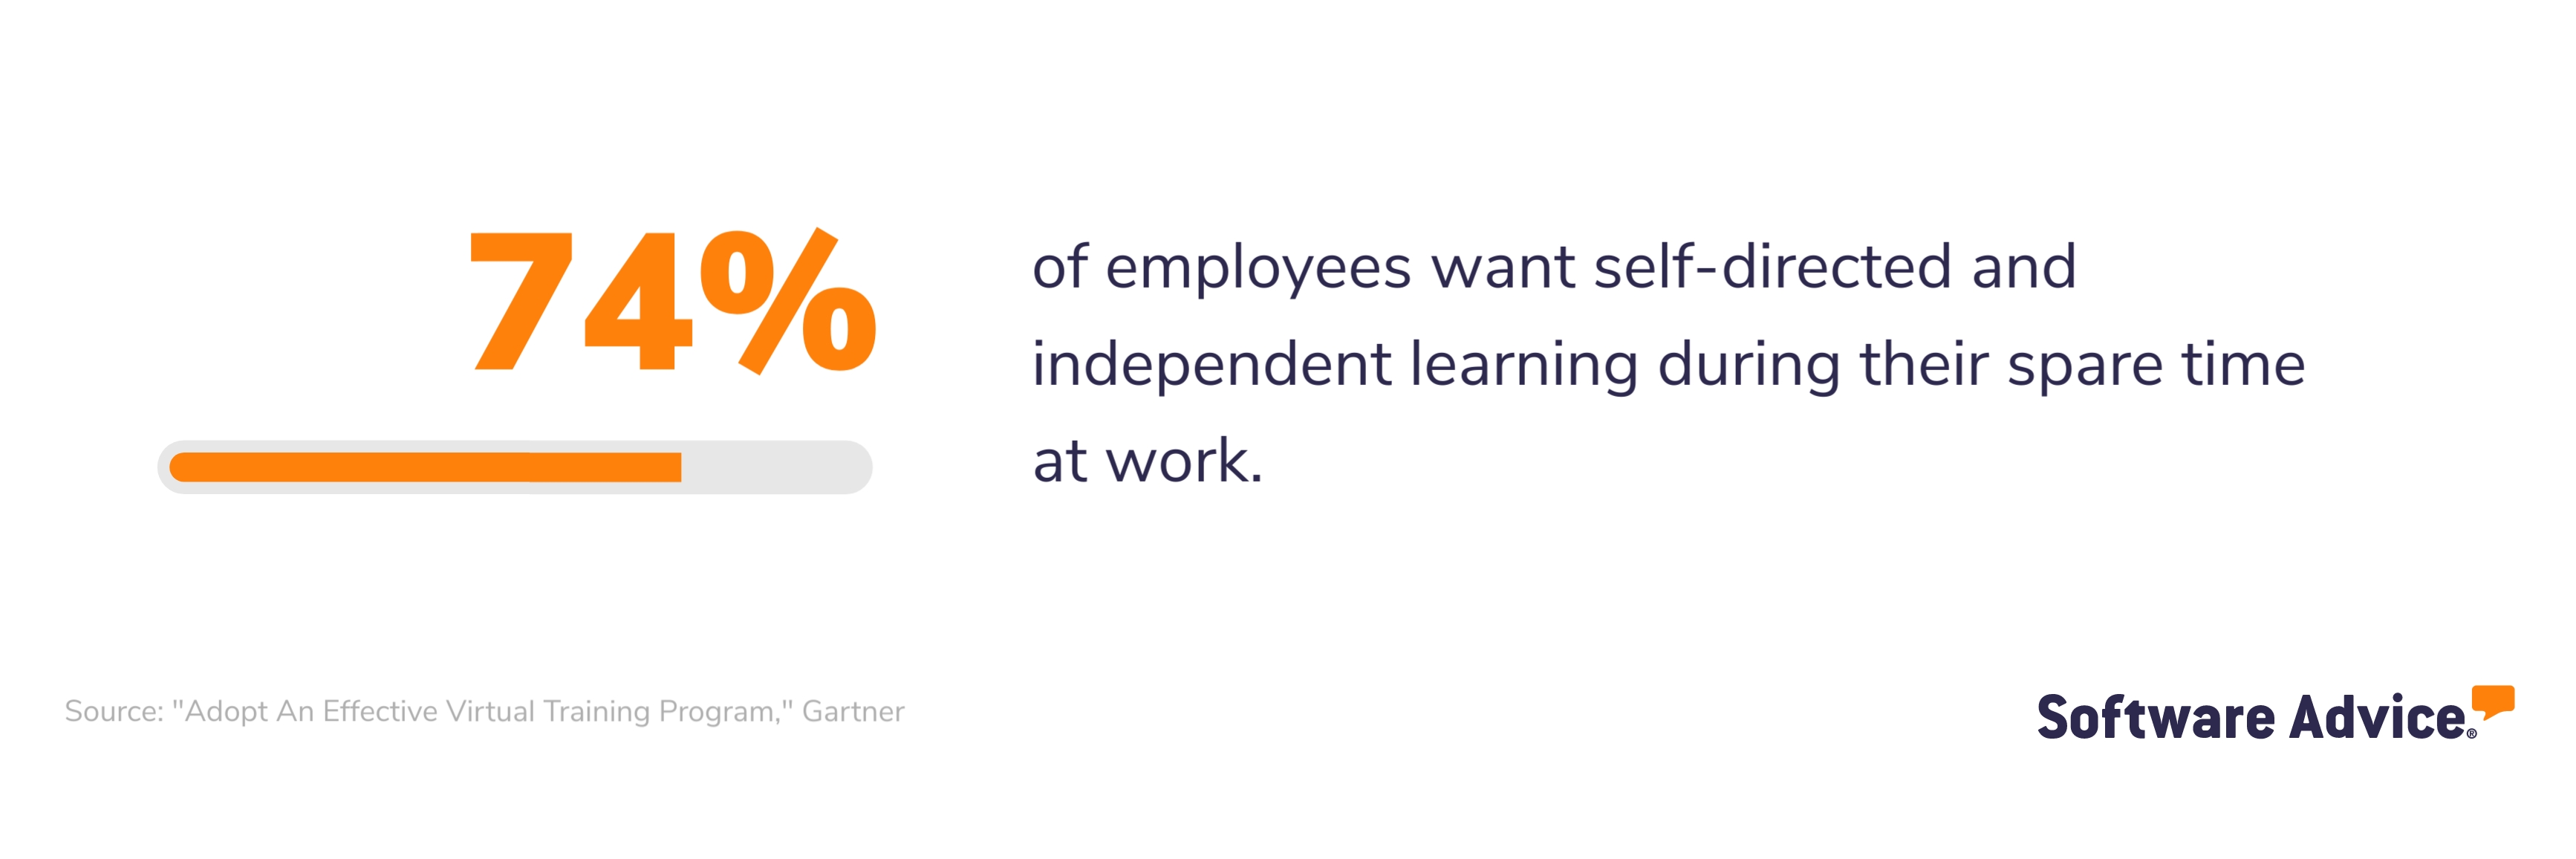 74% of employees want self-directed and independent learning during their spare time at work